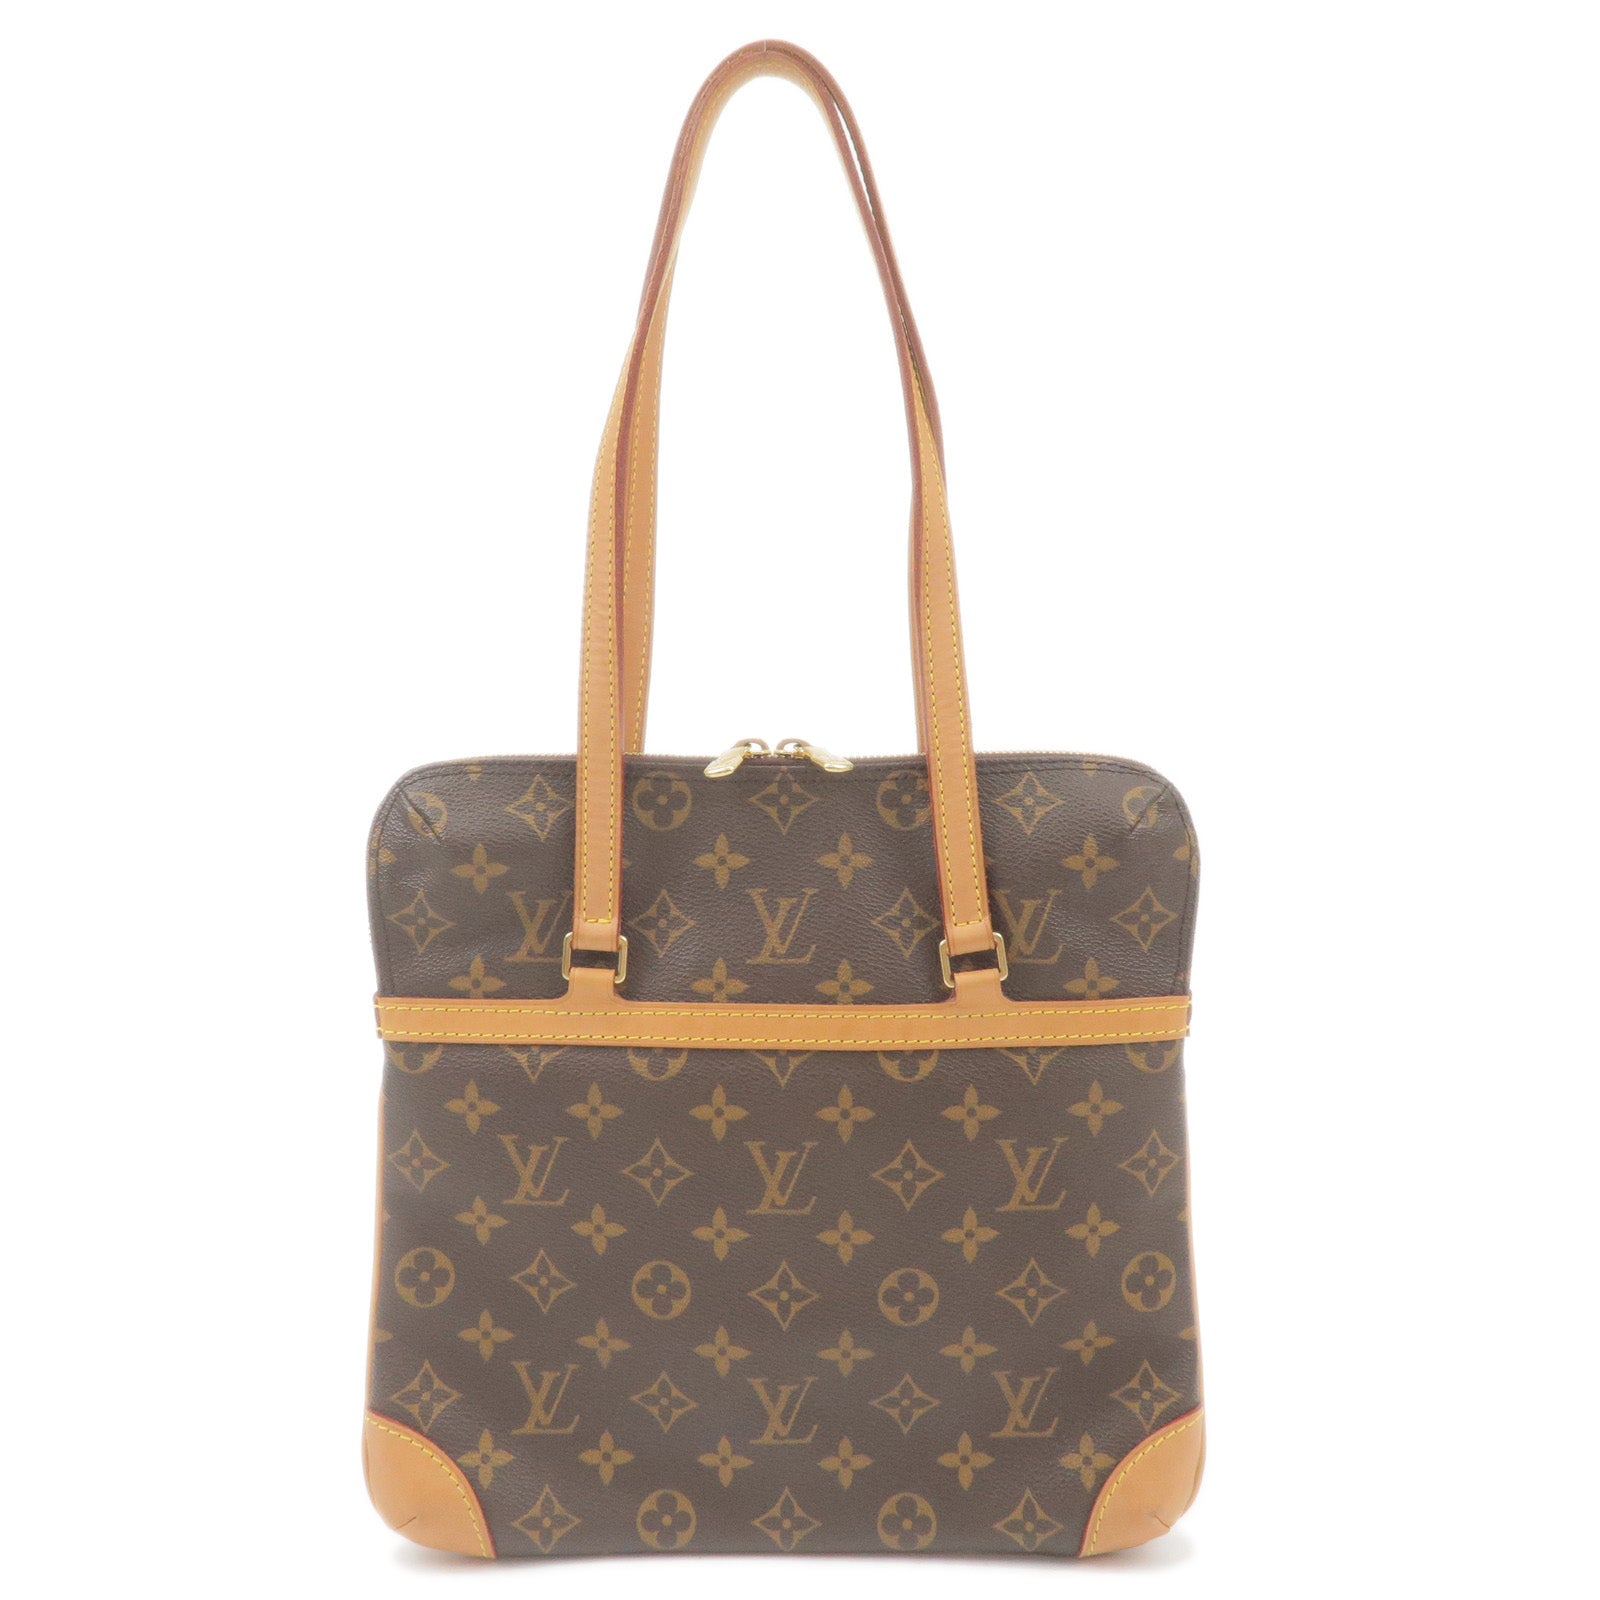 Buy Free Shipping [Used] LOUIS VUITTON Papillon 30 GM handbag with